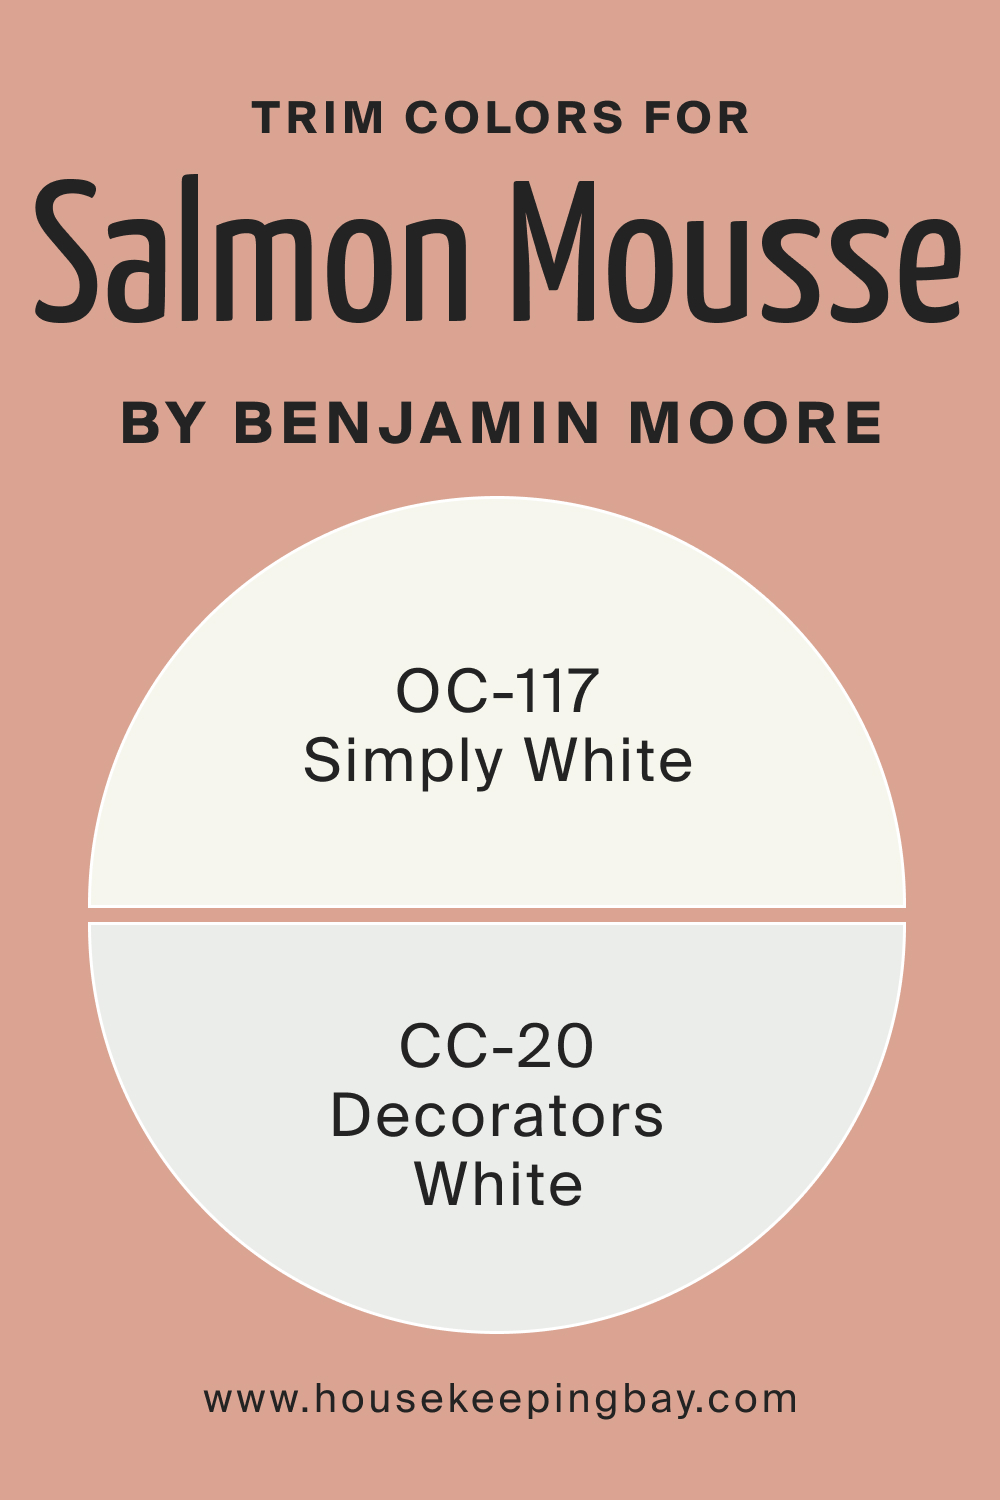 Trim Colors for BM Salmon Mousse 046 by Benjamin Moore